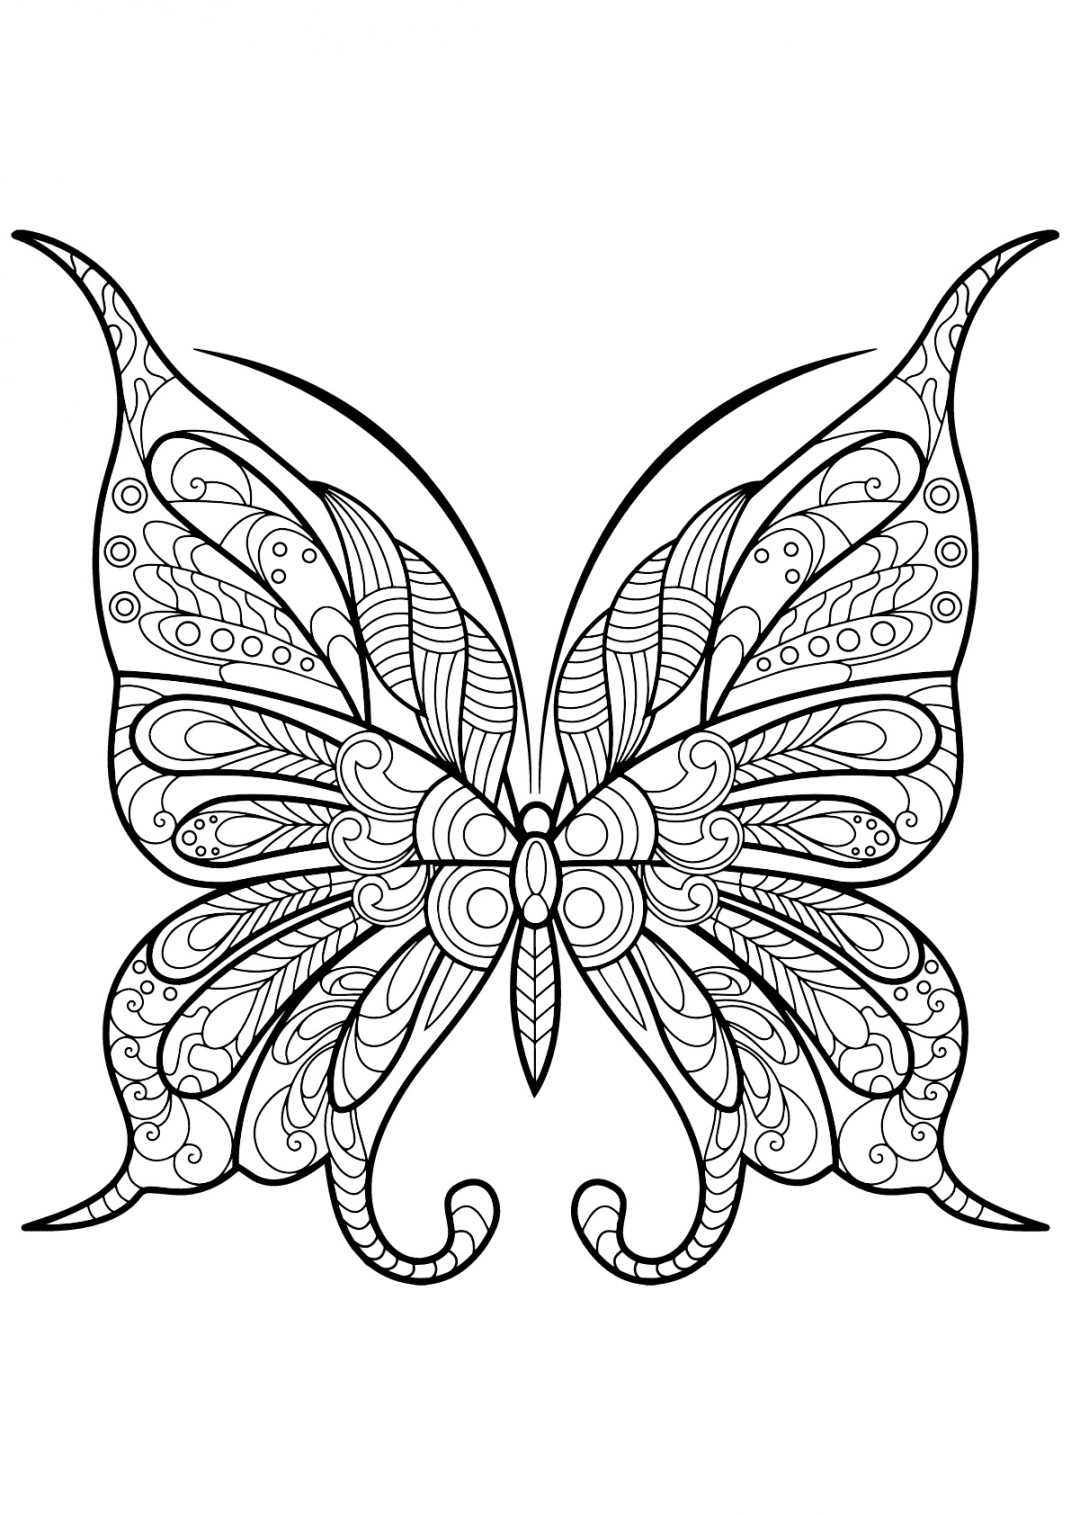 Free Printable Butterfly Coloring Pages - Printable - Free printable butterfly coloring pages - Butterflies Kids